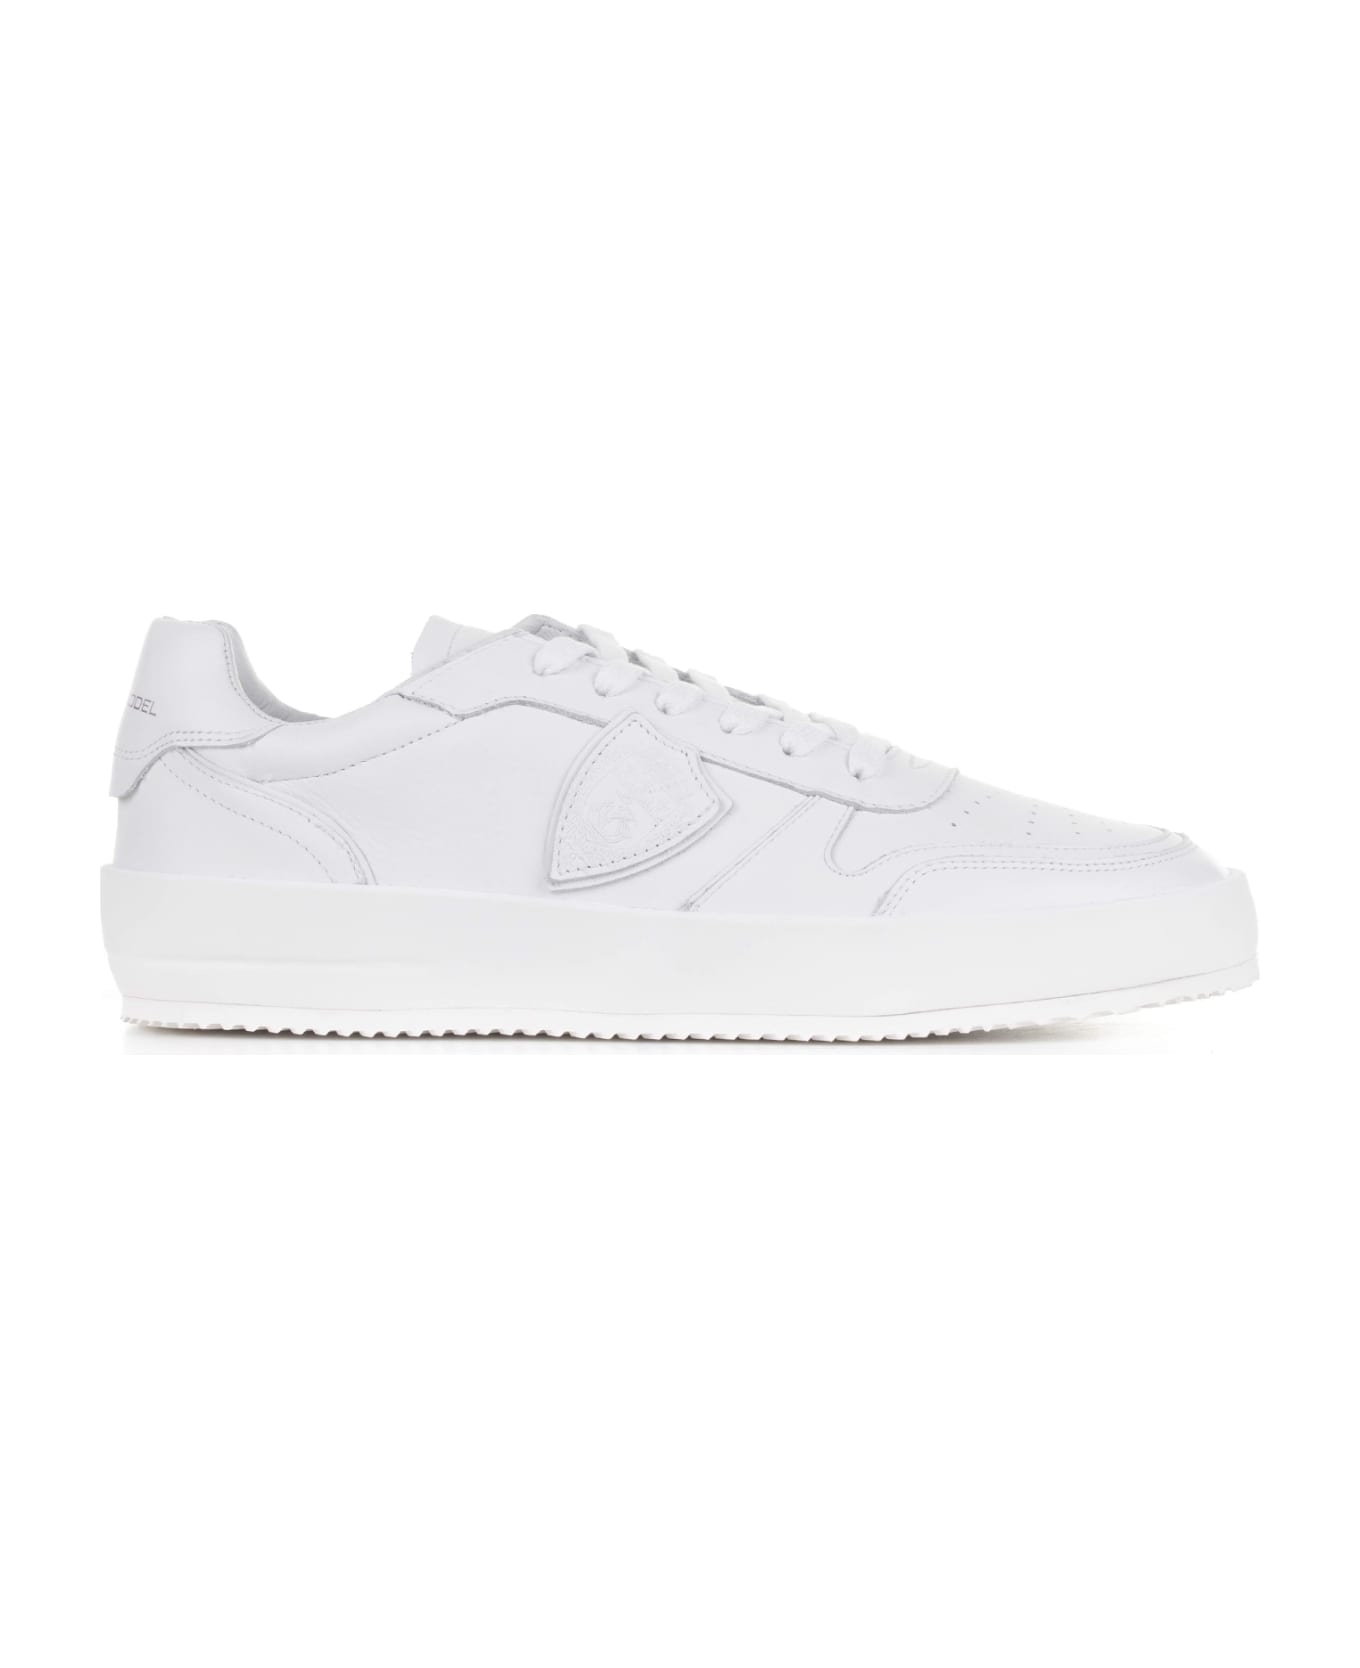 Philippe Model Nice White Low Sneakers For Men - BLANC